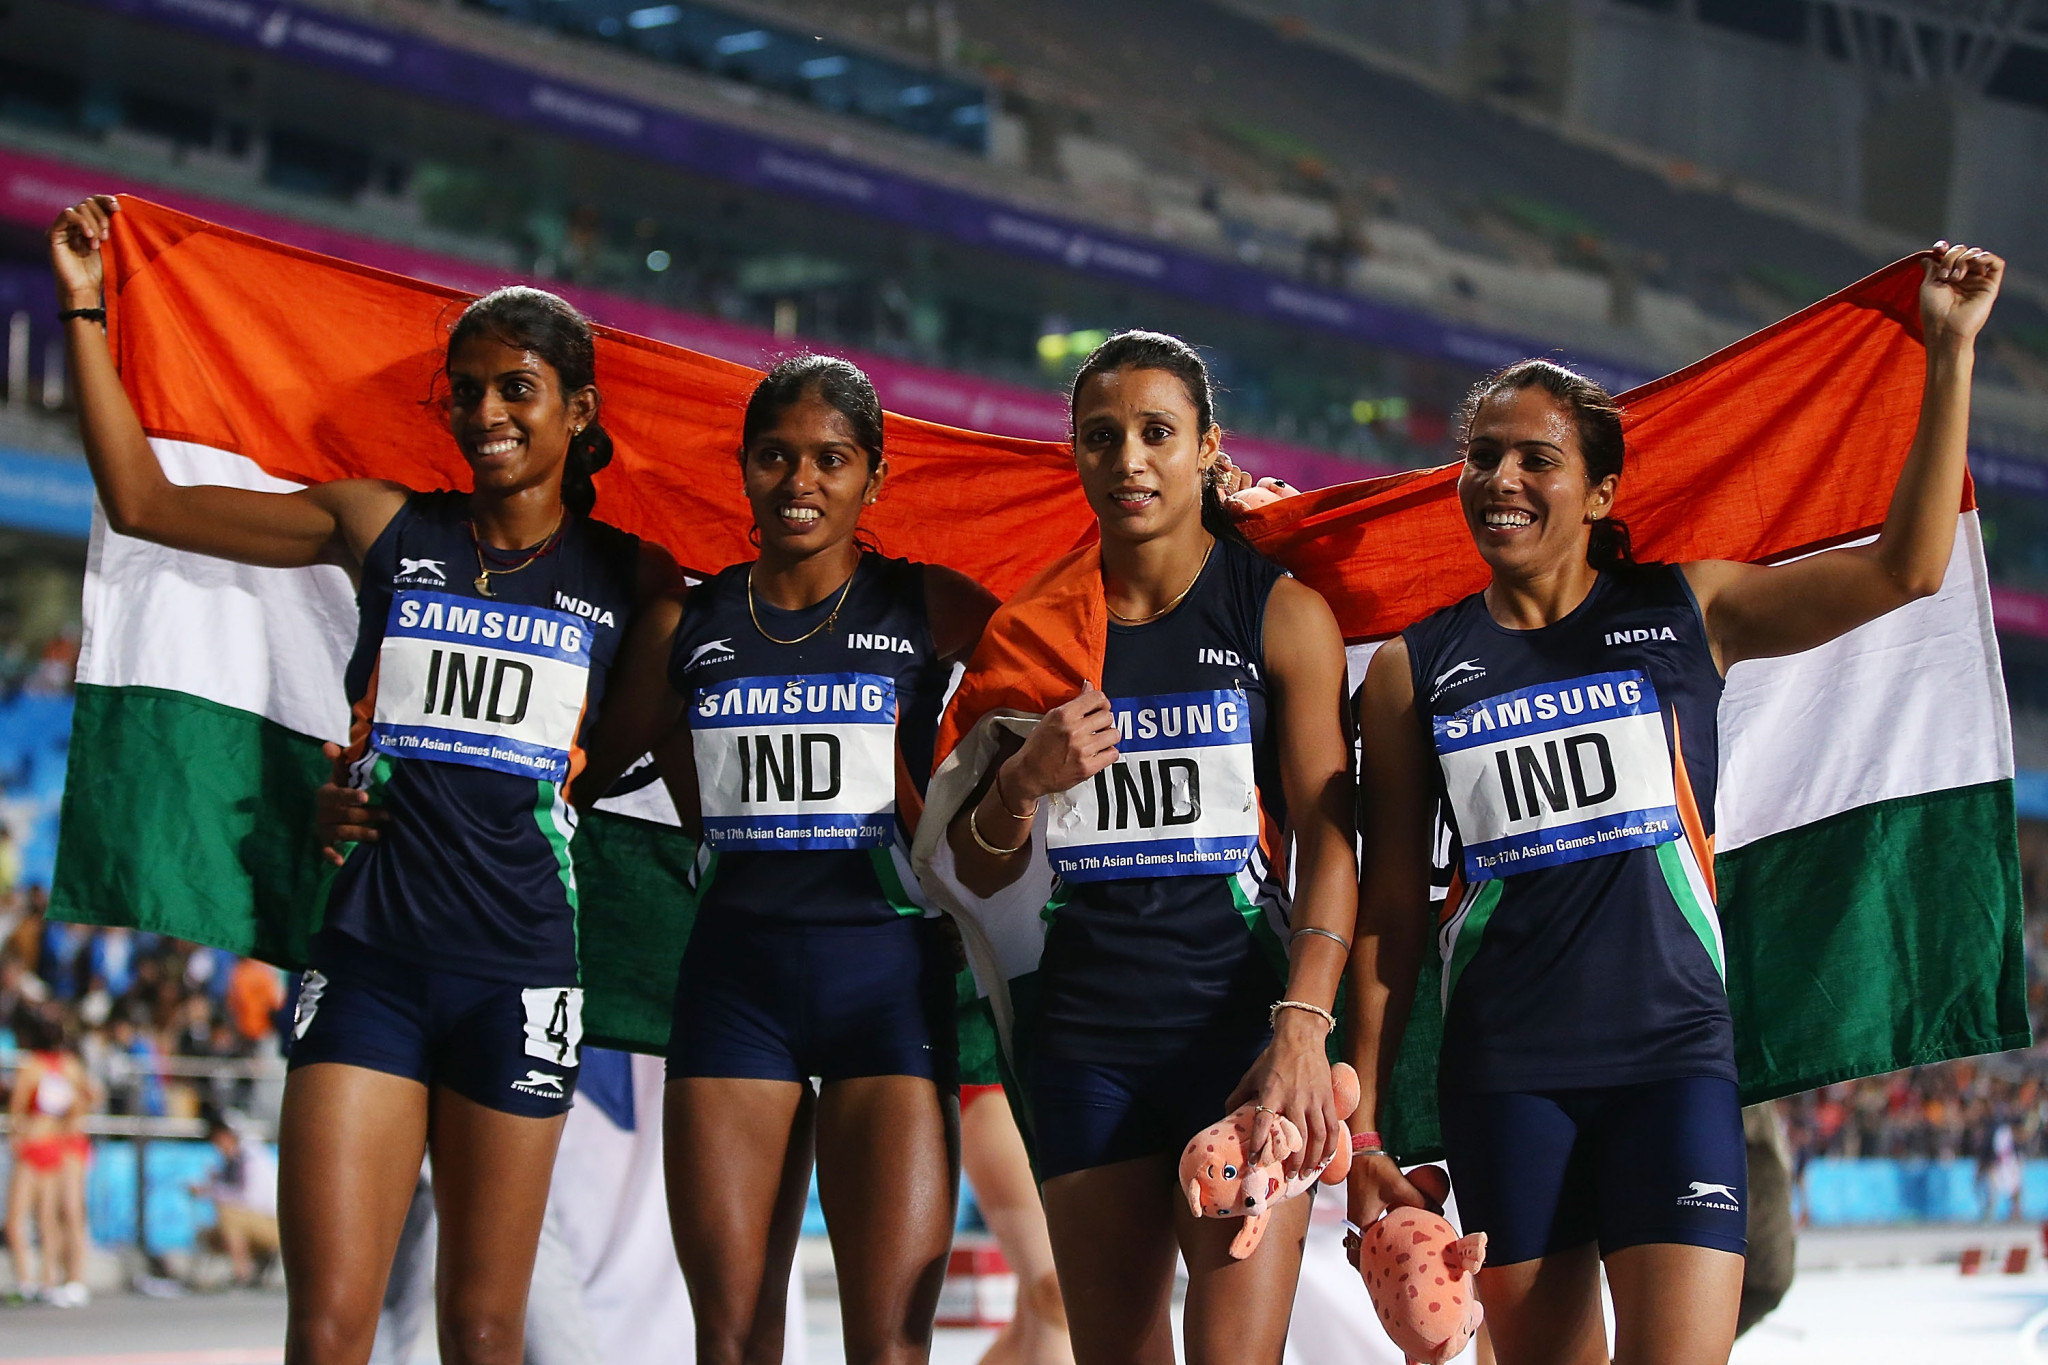 Tintu Lukka was a member of the Indian 4x400m relay team which won gold in Incheon ©Getty Images